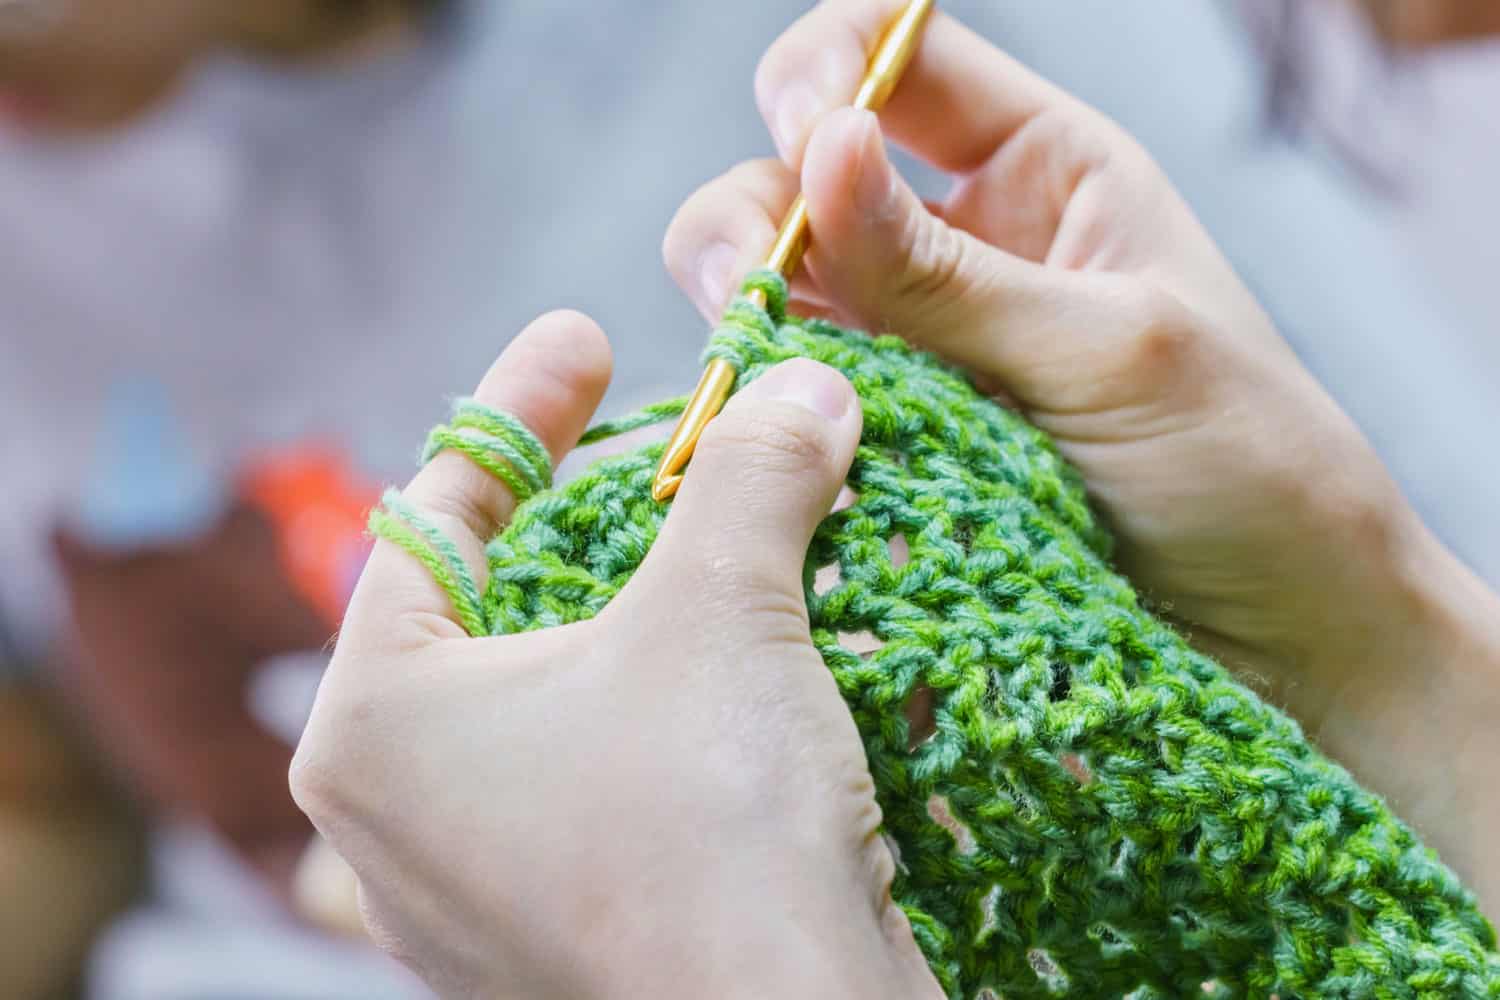 A woman making a scarf using crochet needles and a green yarn